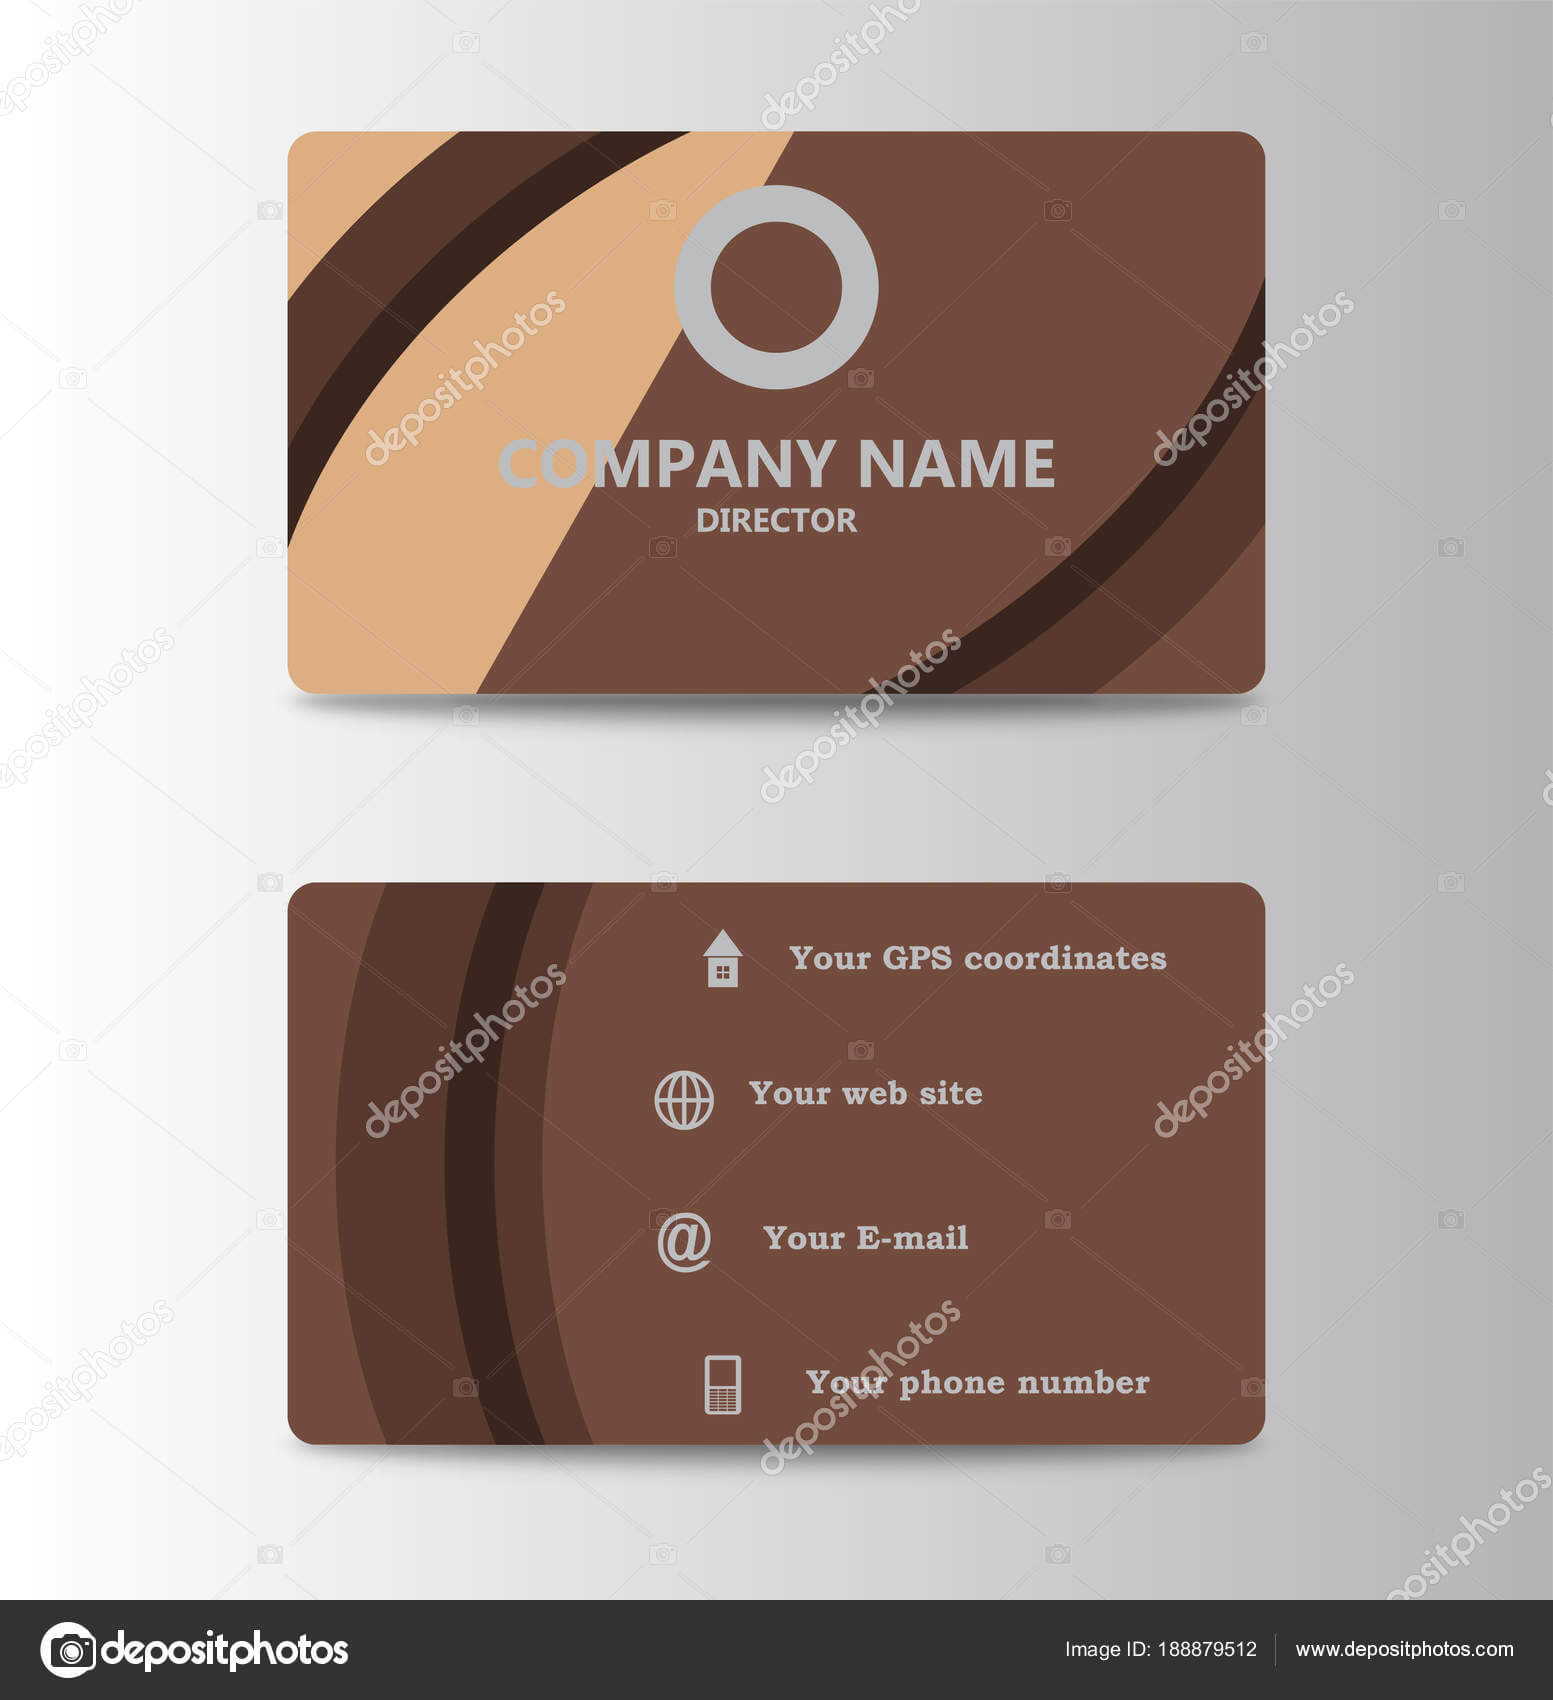 Corporate Id Card Design Template. Personal Id Card For Pertaining To Personal Identification Card Template